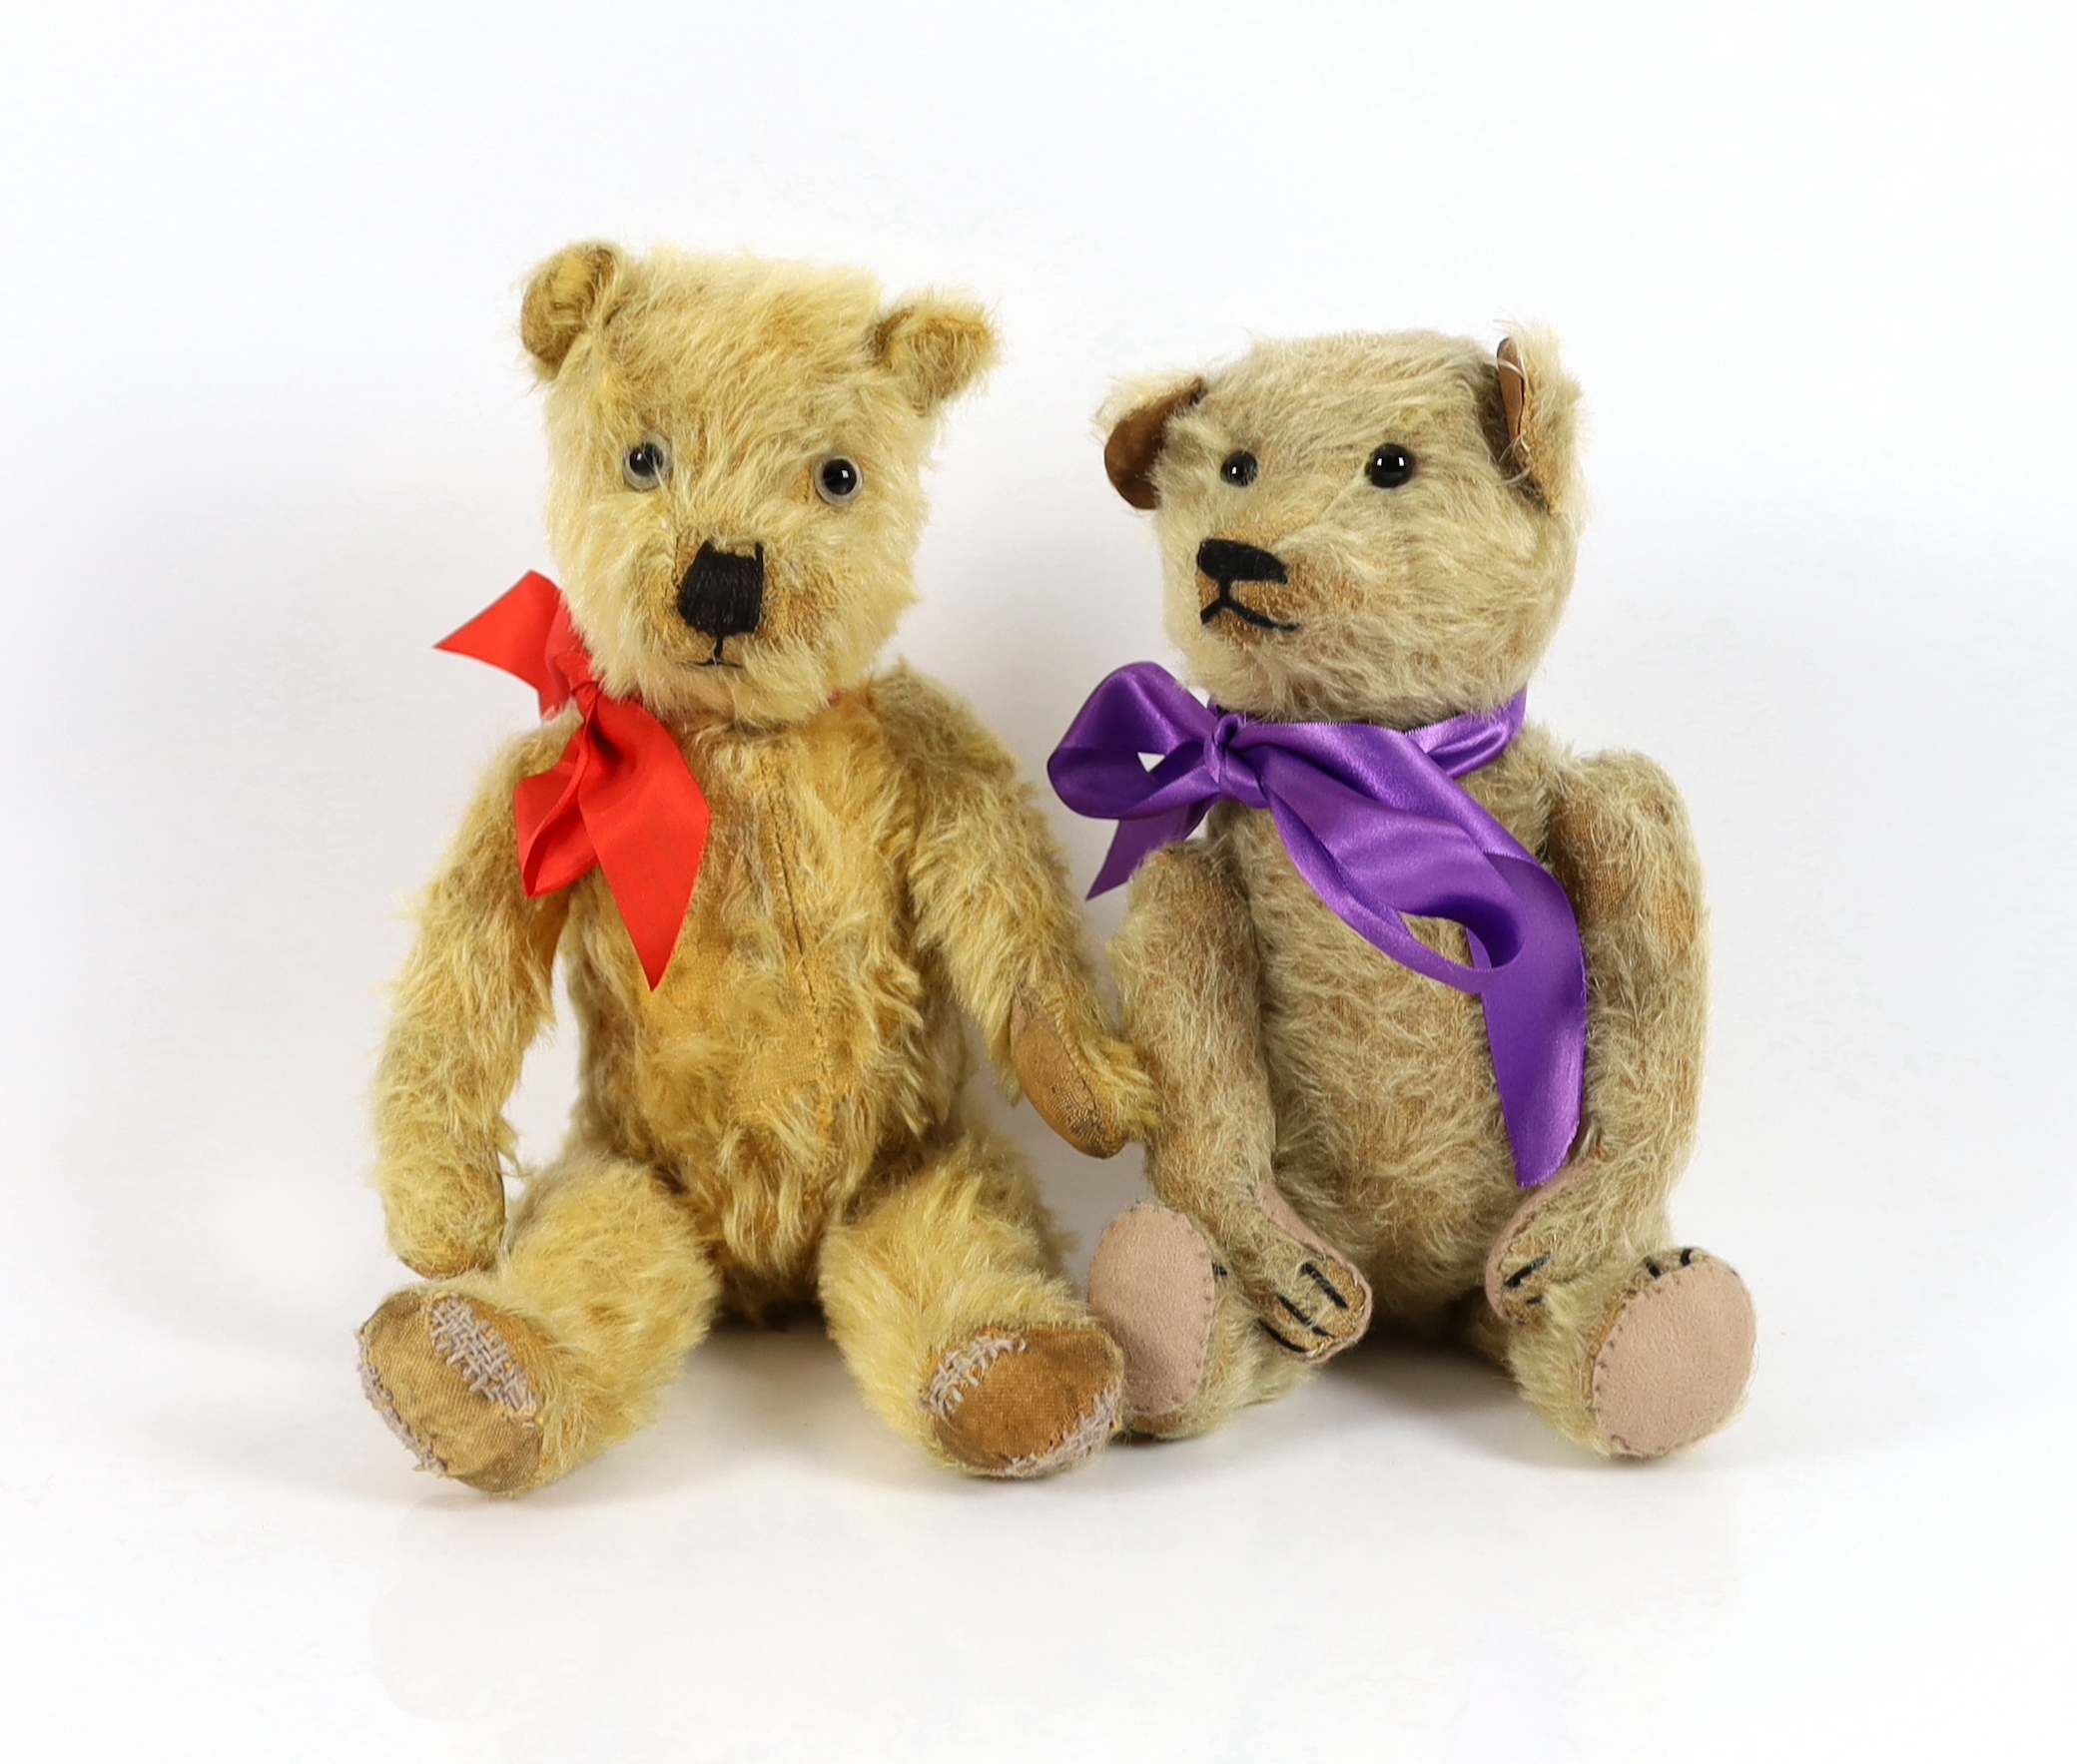 A plush covered bear with purple ribbon, 30cm and a plush covered bear with tartan ribbon, 36cm (2)                                                                                                                         